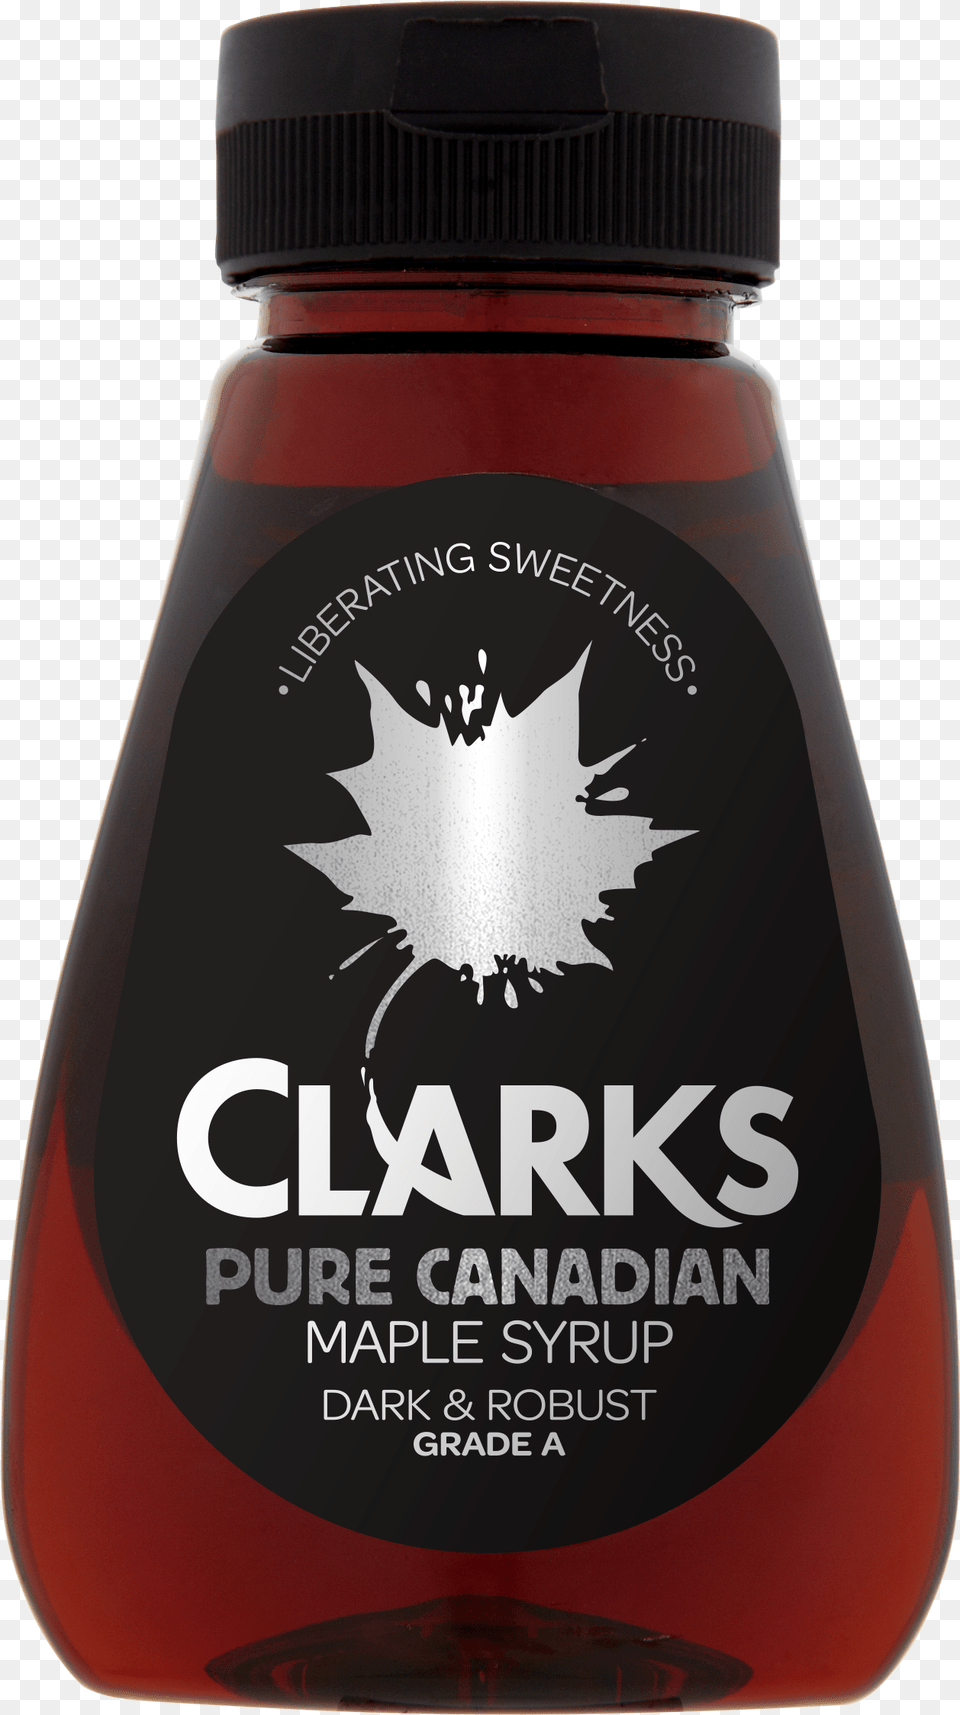 Dark And Robust Maple Syrup Front Clarks Maple Syrup Back, Bottle, Ammunition, Grenade, Weapon Png Image